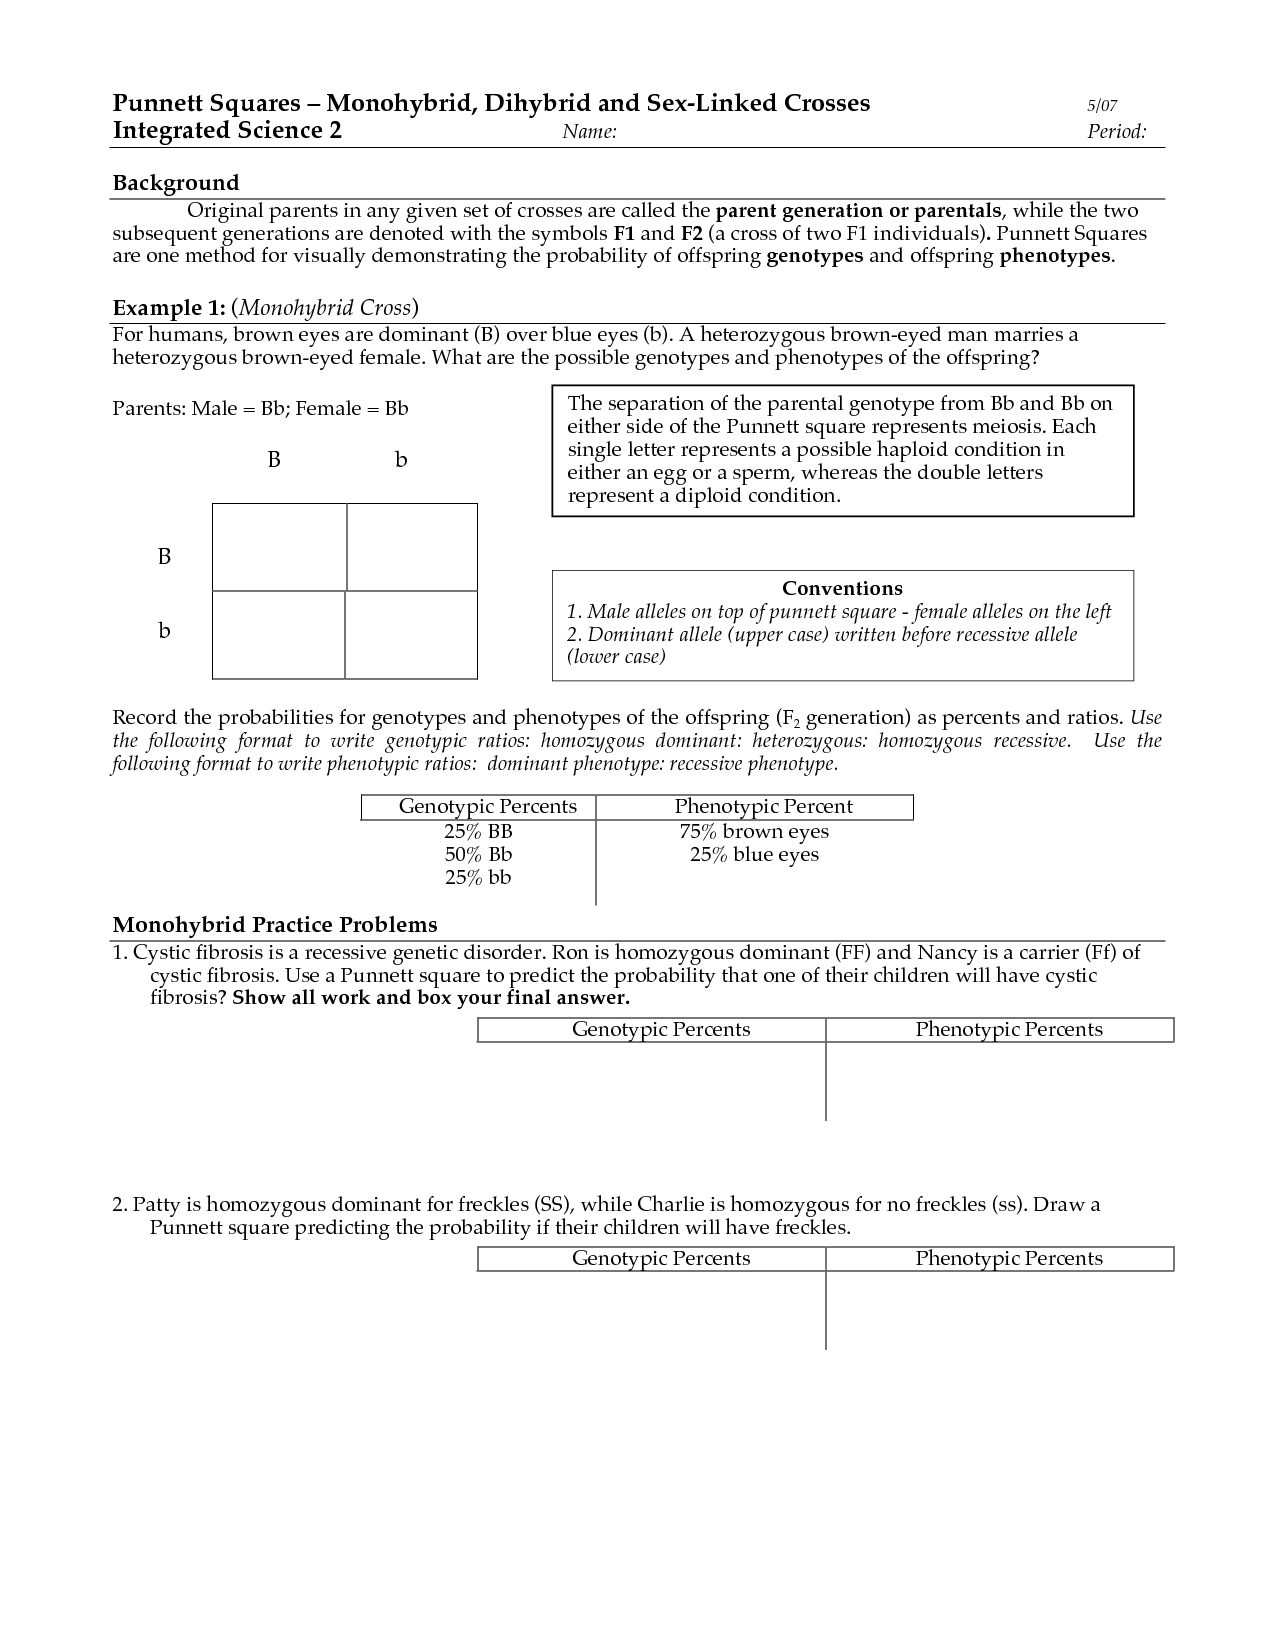 19 Best Images Of Dihybrid Worksheet With Answer Key Dihybrid Cross Worksheet Answer Key 